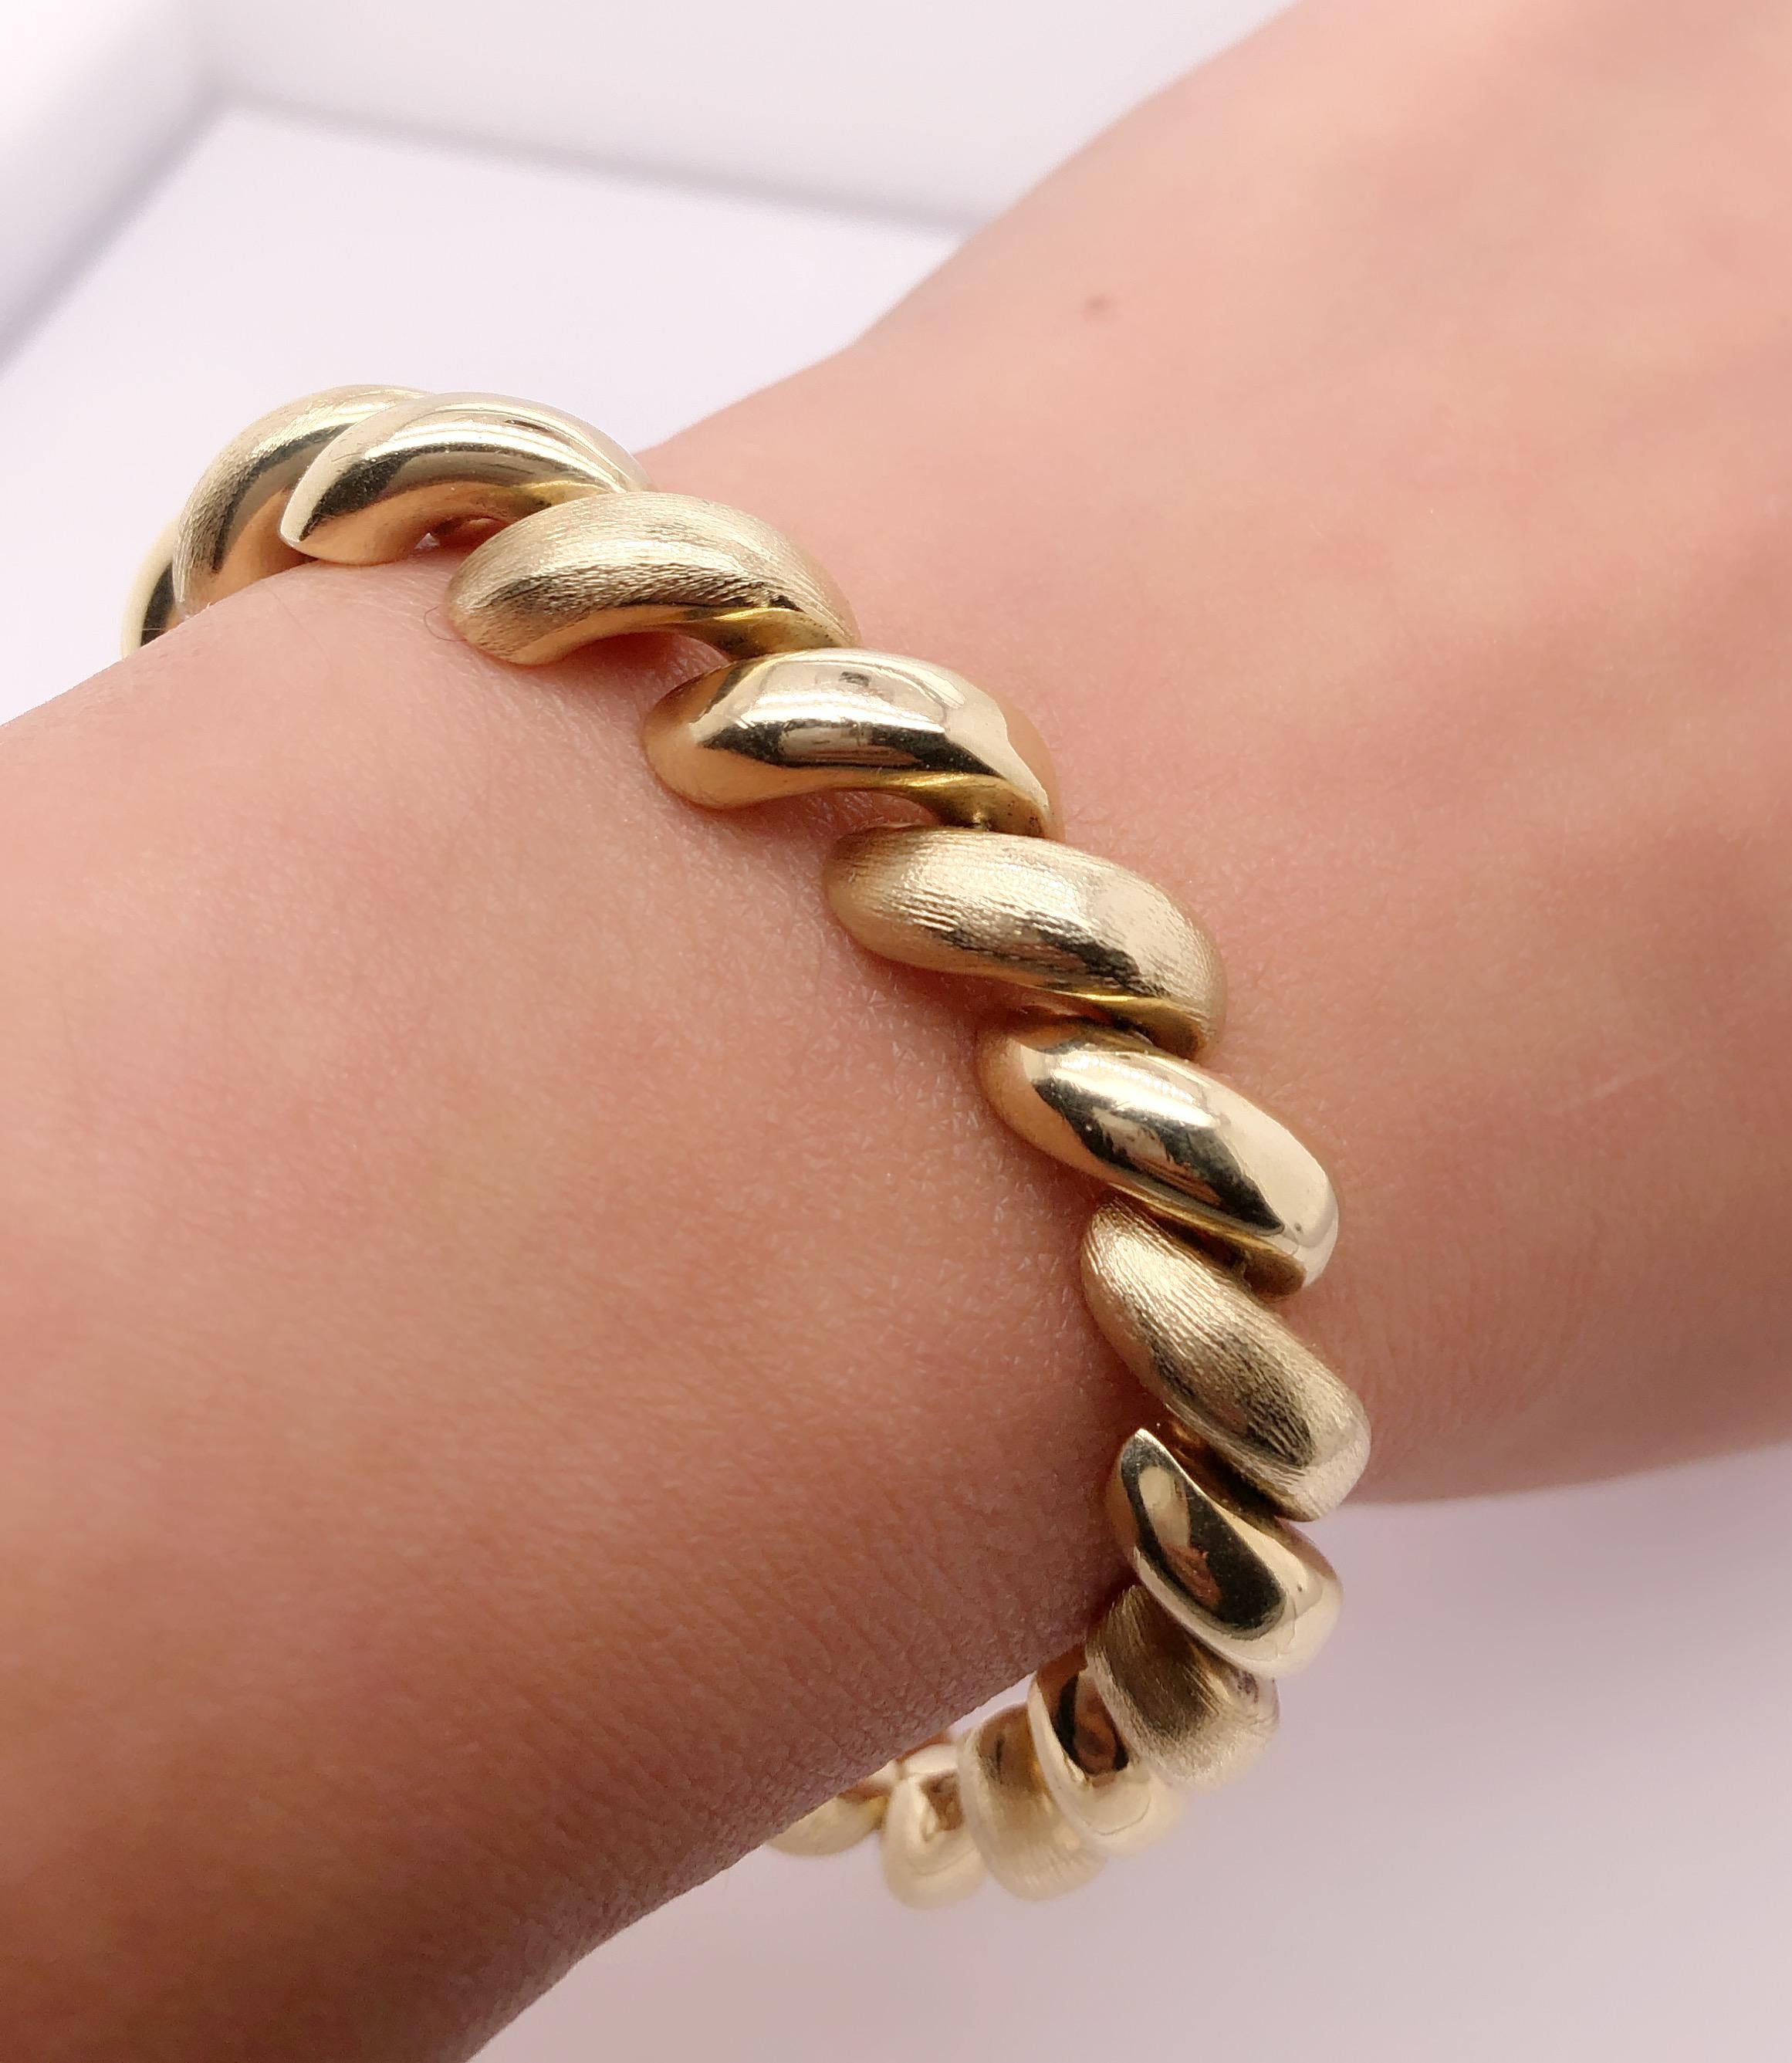 14Kt Yellow Gold Spiral San Marco Bracelet. 23 grams. 7.5 inches. Italian 9.66mm wide. 